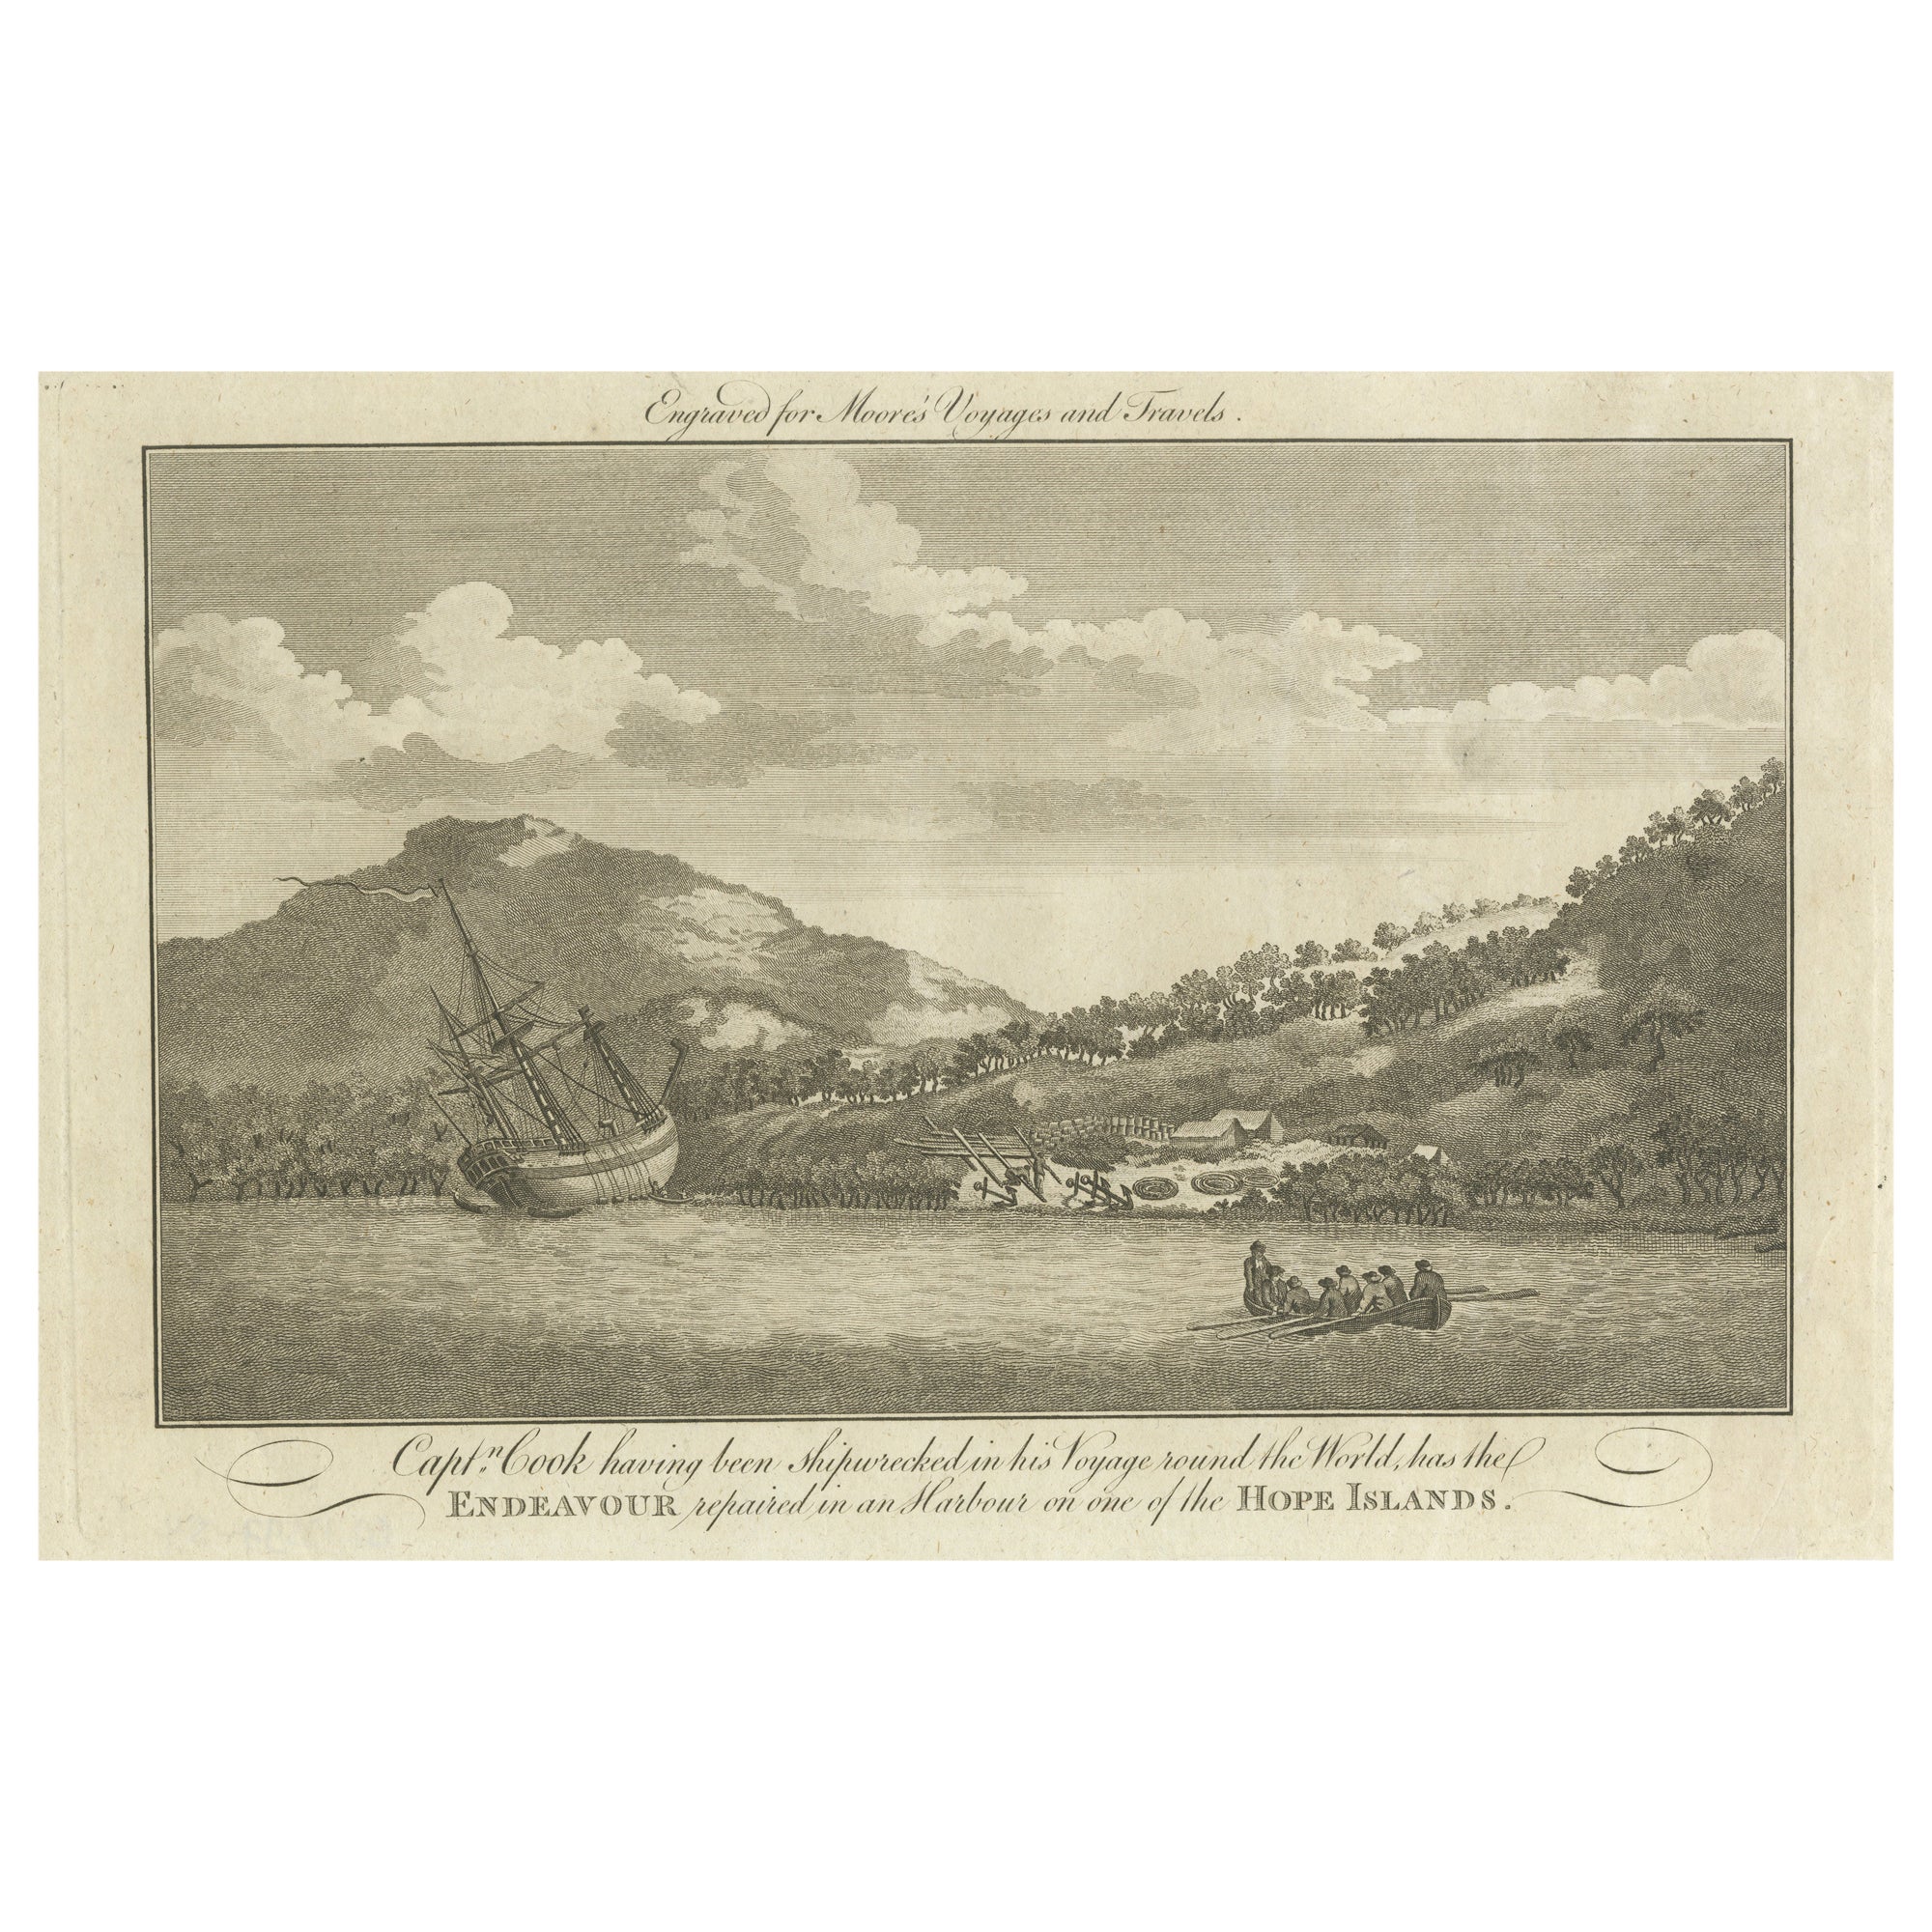 Repairing the Endeavour: Captain Cook's Maritime Ordeal at Hope Islands, ca.1770 For Sale